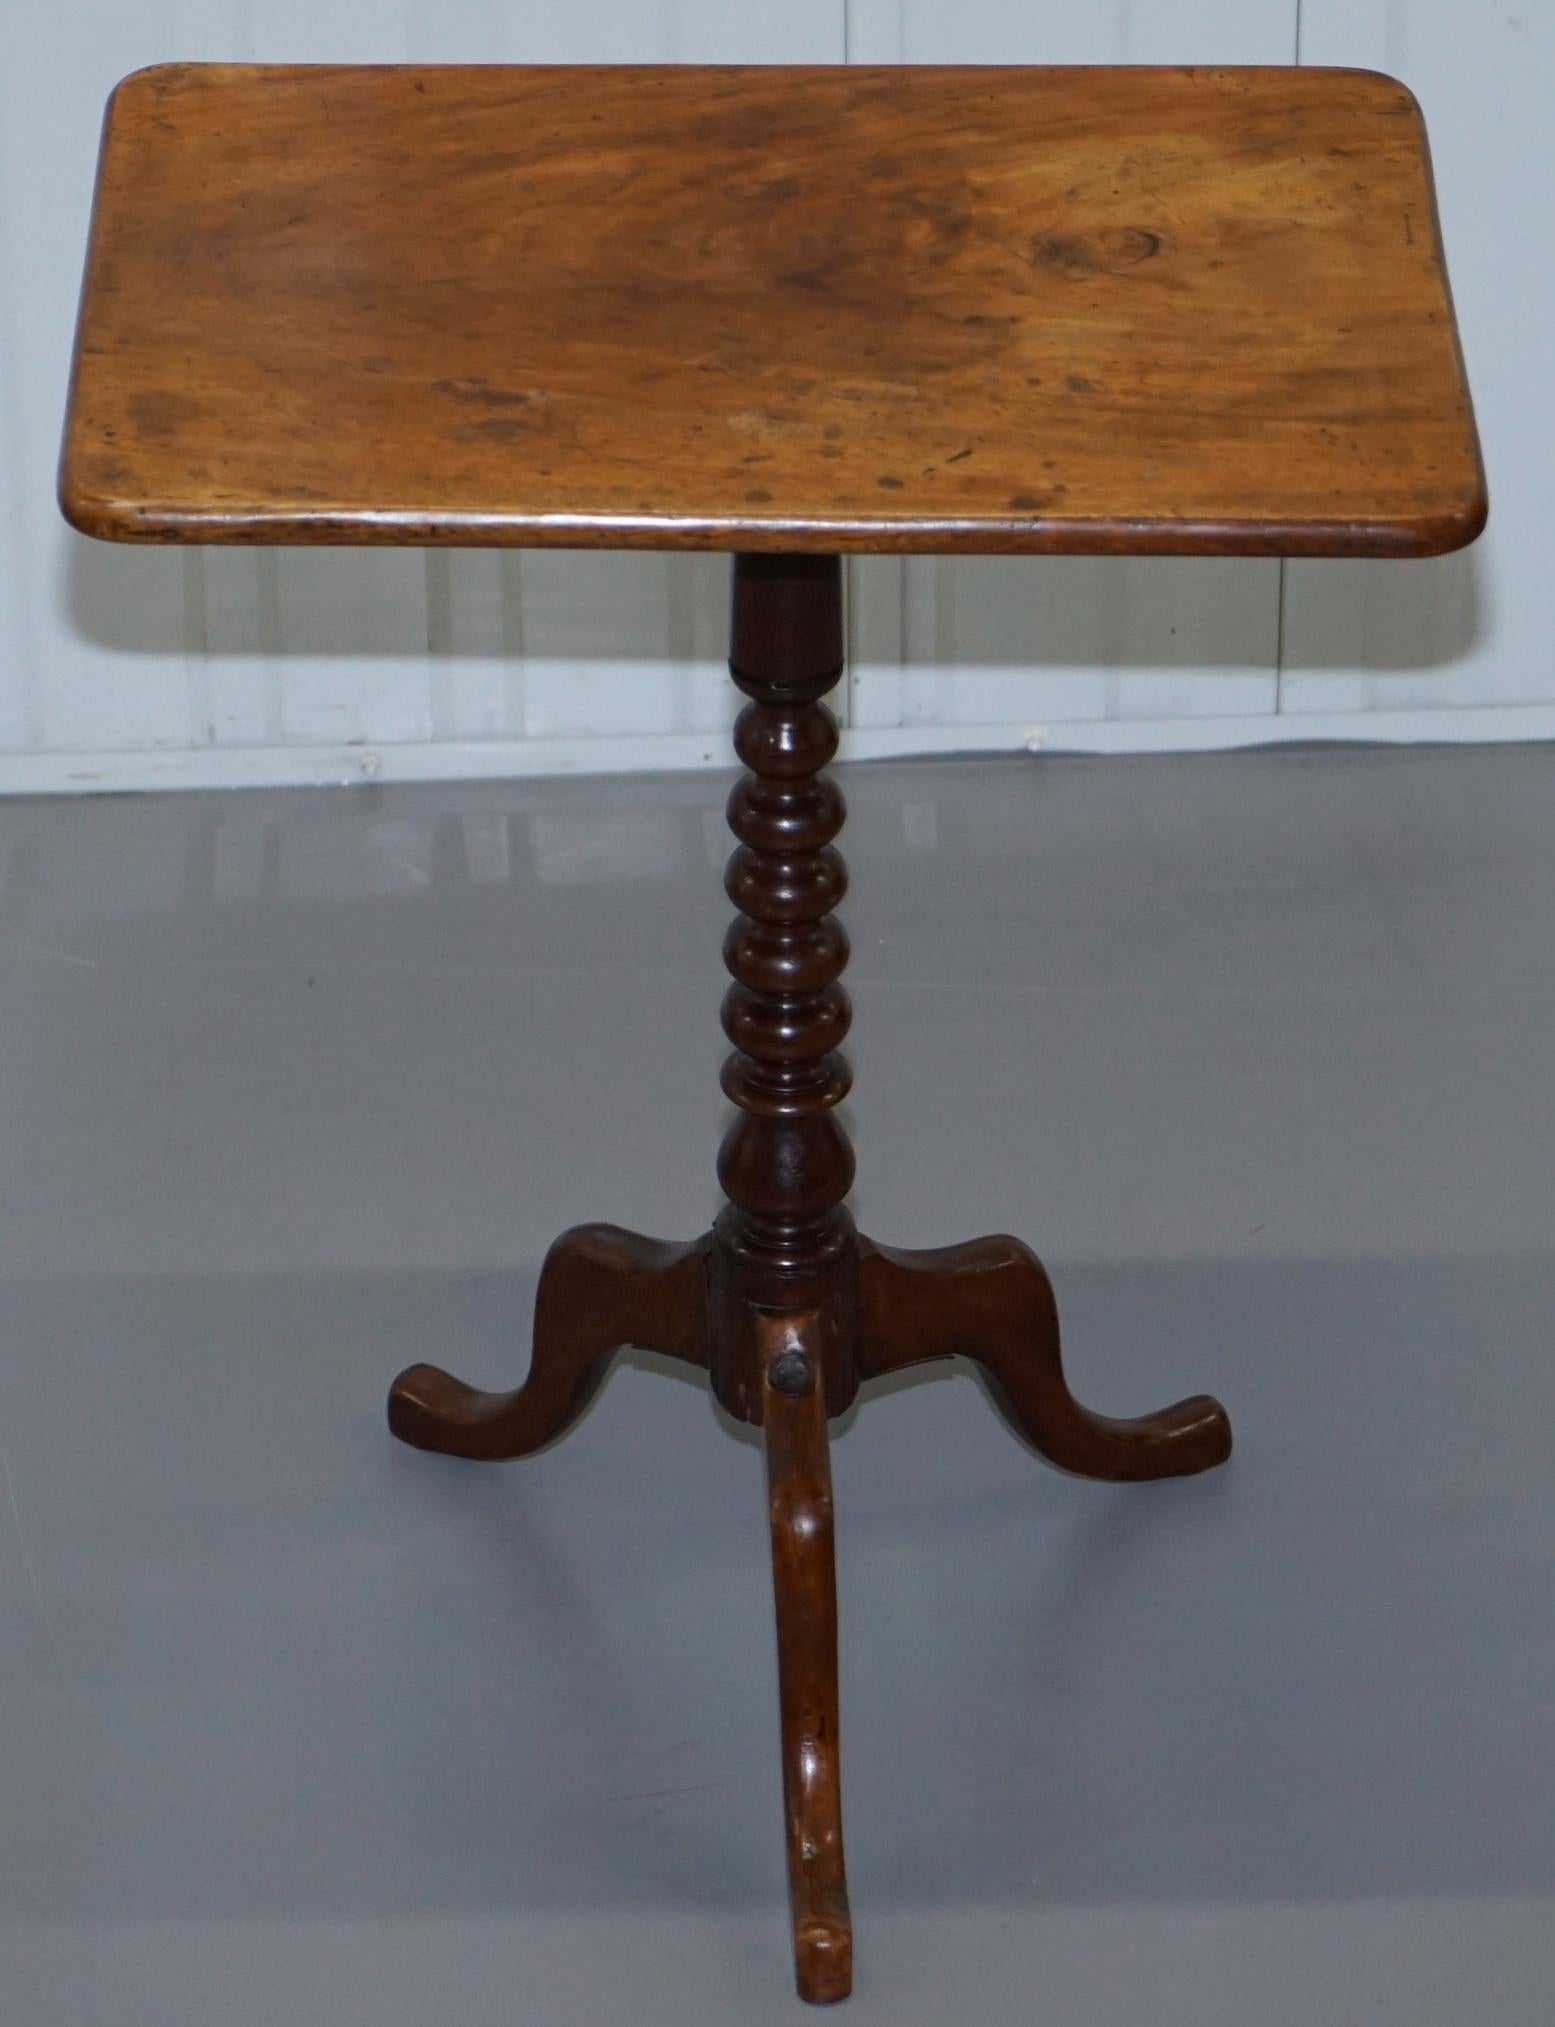 We are delighted to this lovely circa 1800 Walnut tilt top side table 

A good looking well made and multi functional piece of furniture, ideally suited as a lamp wine or even games card table, the tilt top function is great for space